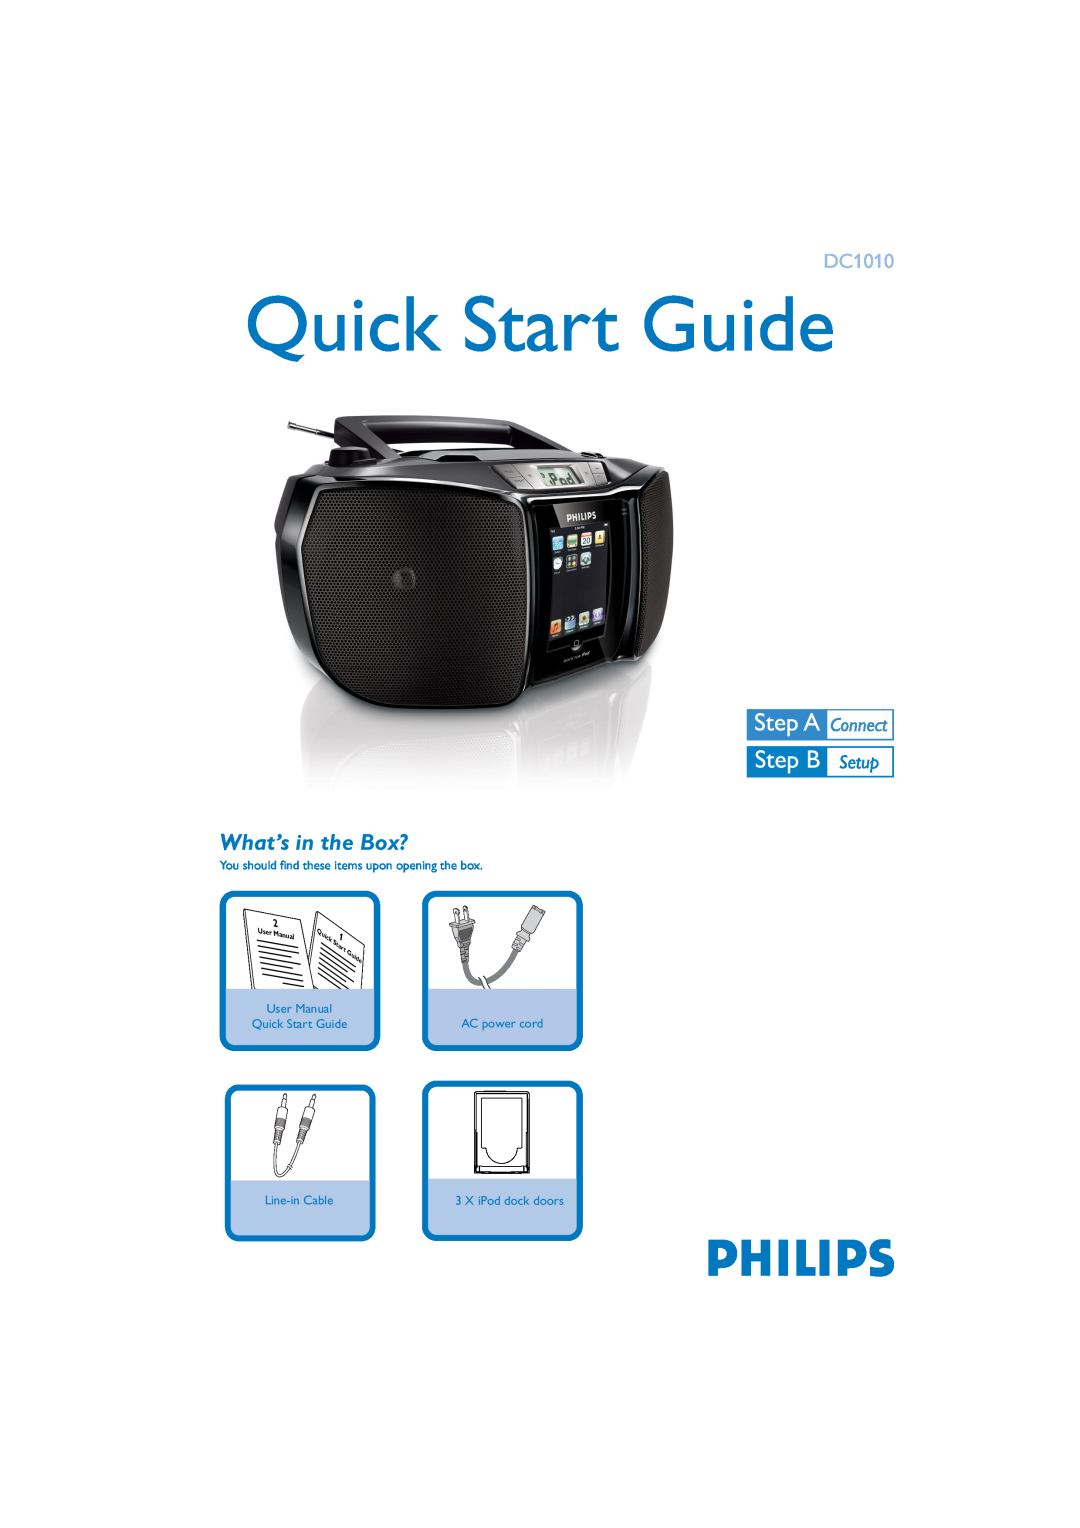 Philips DC1010 quick start You should find these items upon opening the box, AC power cord, Line-in Cable, Guide, Start 